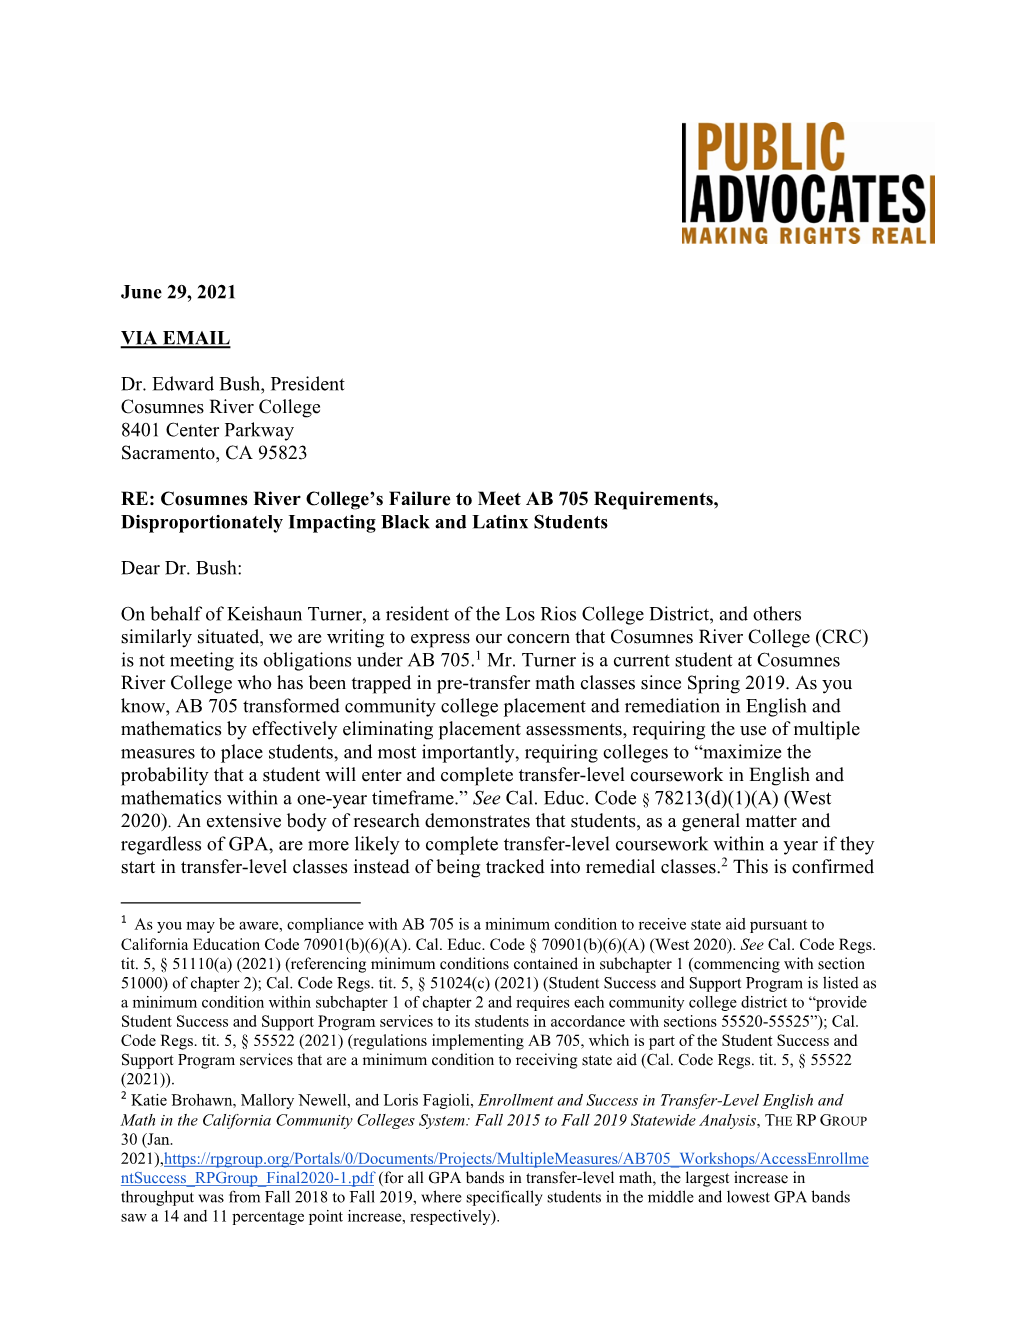 Demand Letter to Cosumnes River College